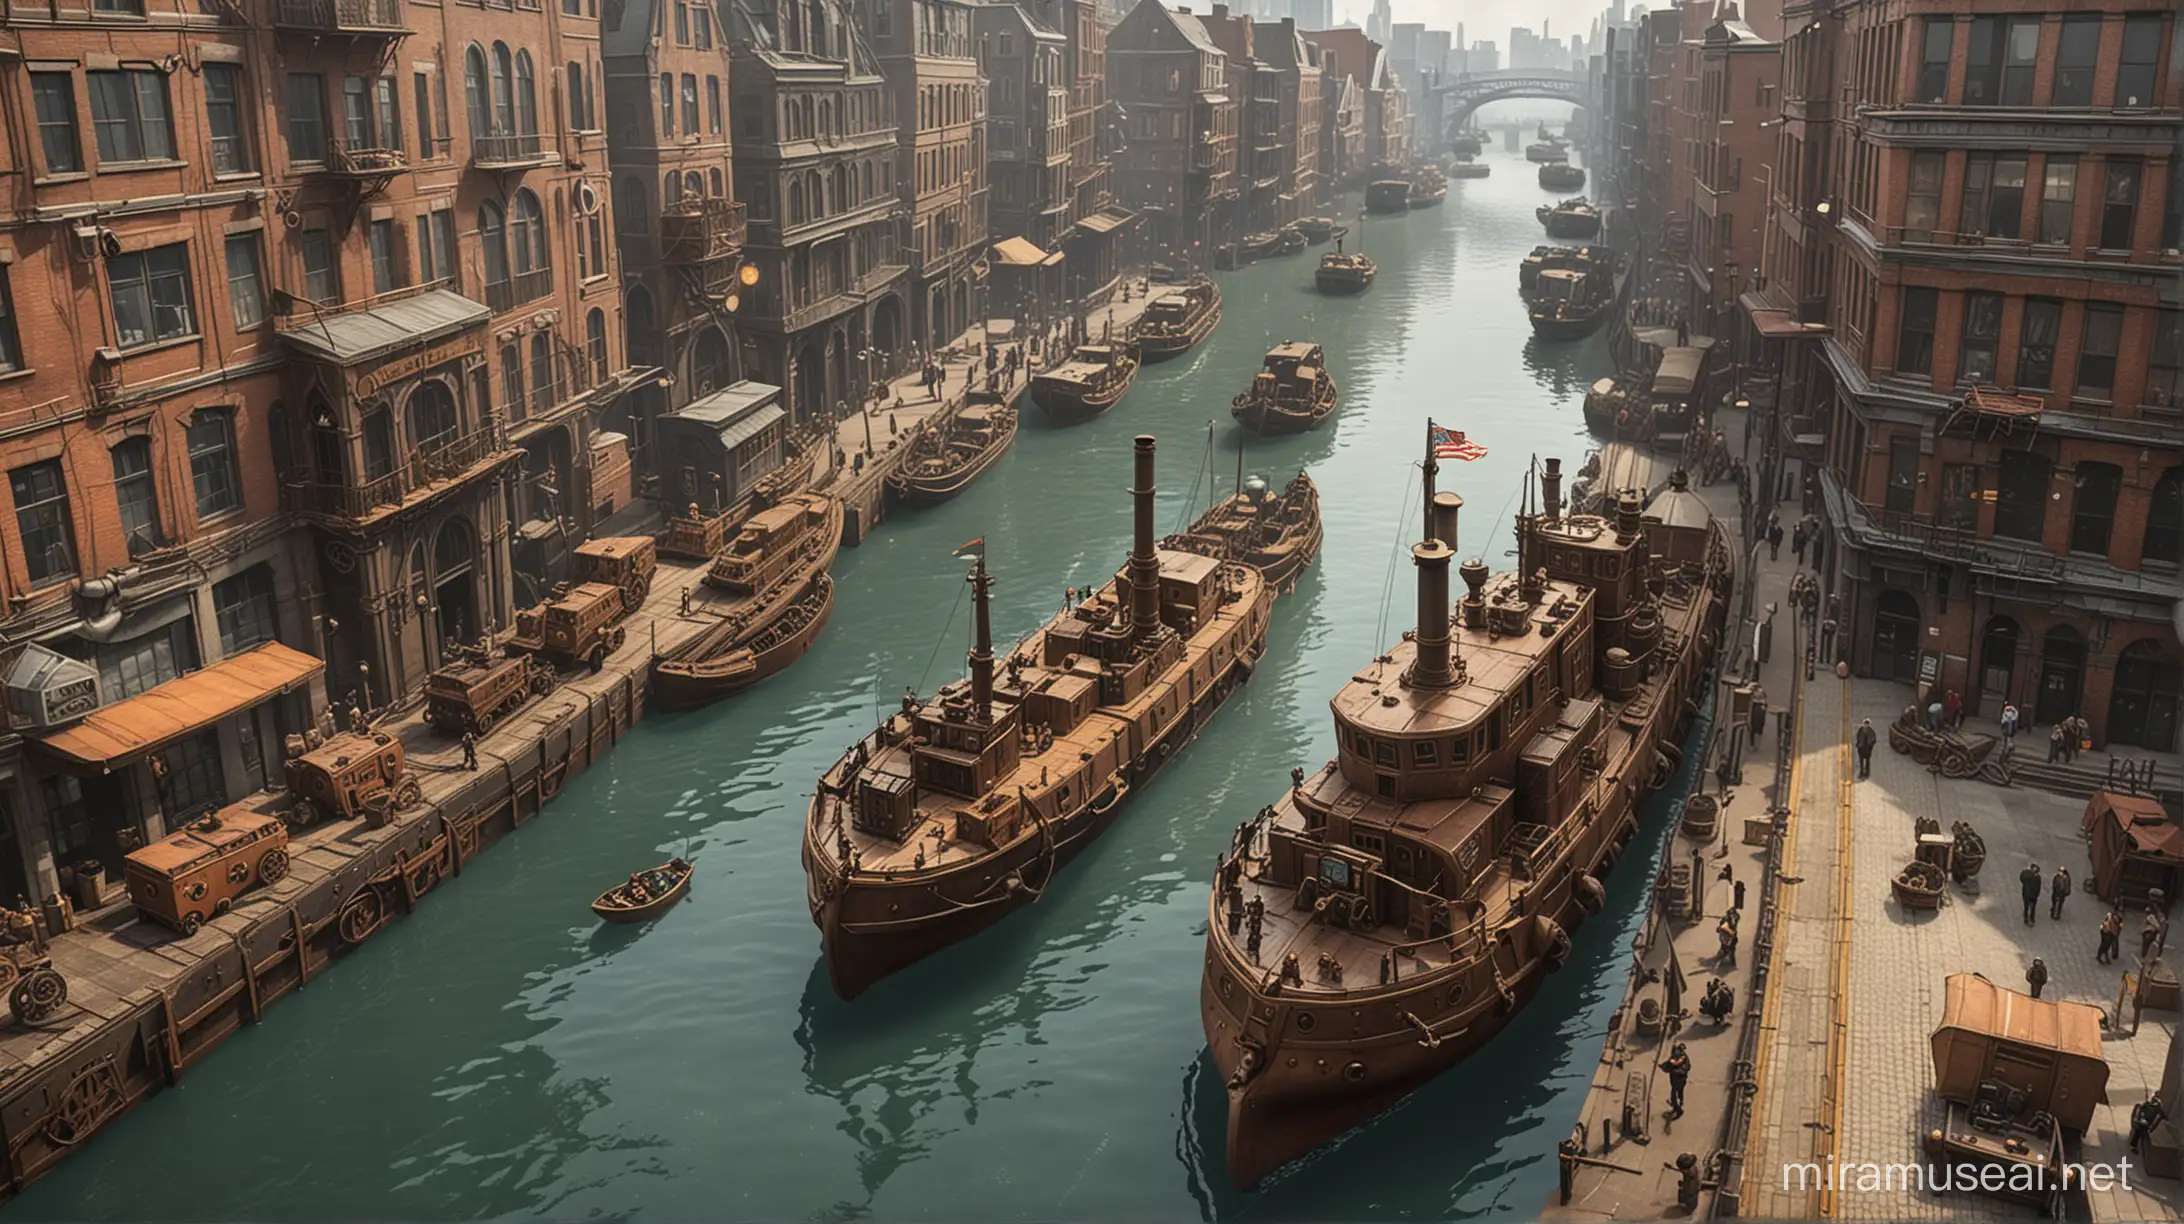 a big steampunk barge tows three smaller steampunk barges through the wide channel in the center of a stampunk city. view from a high building.